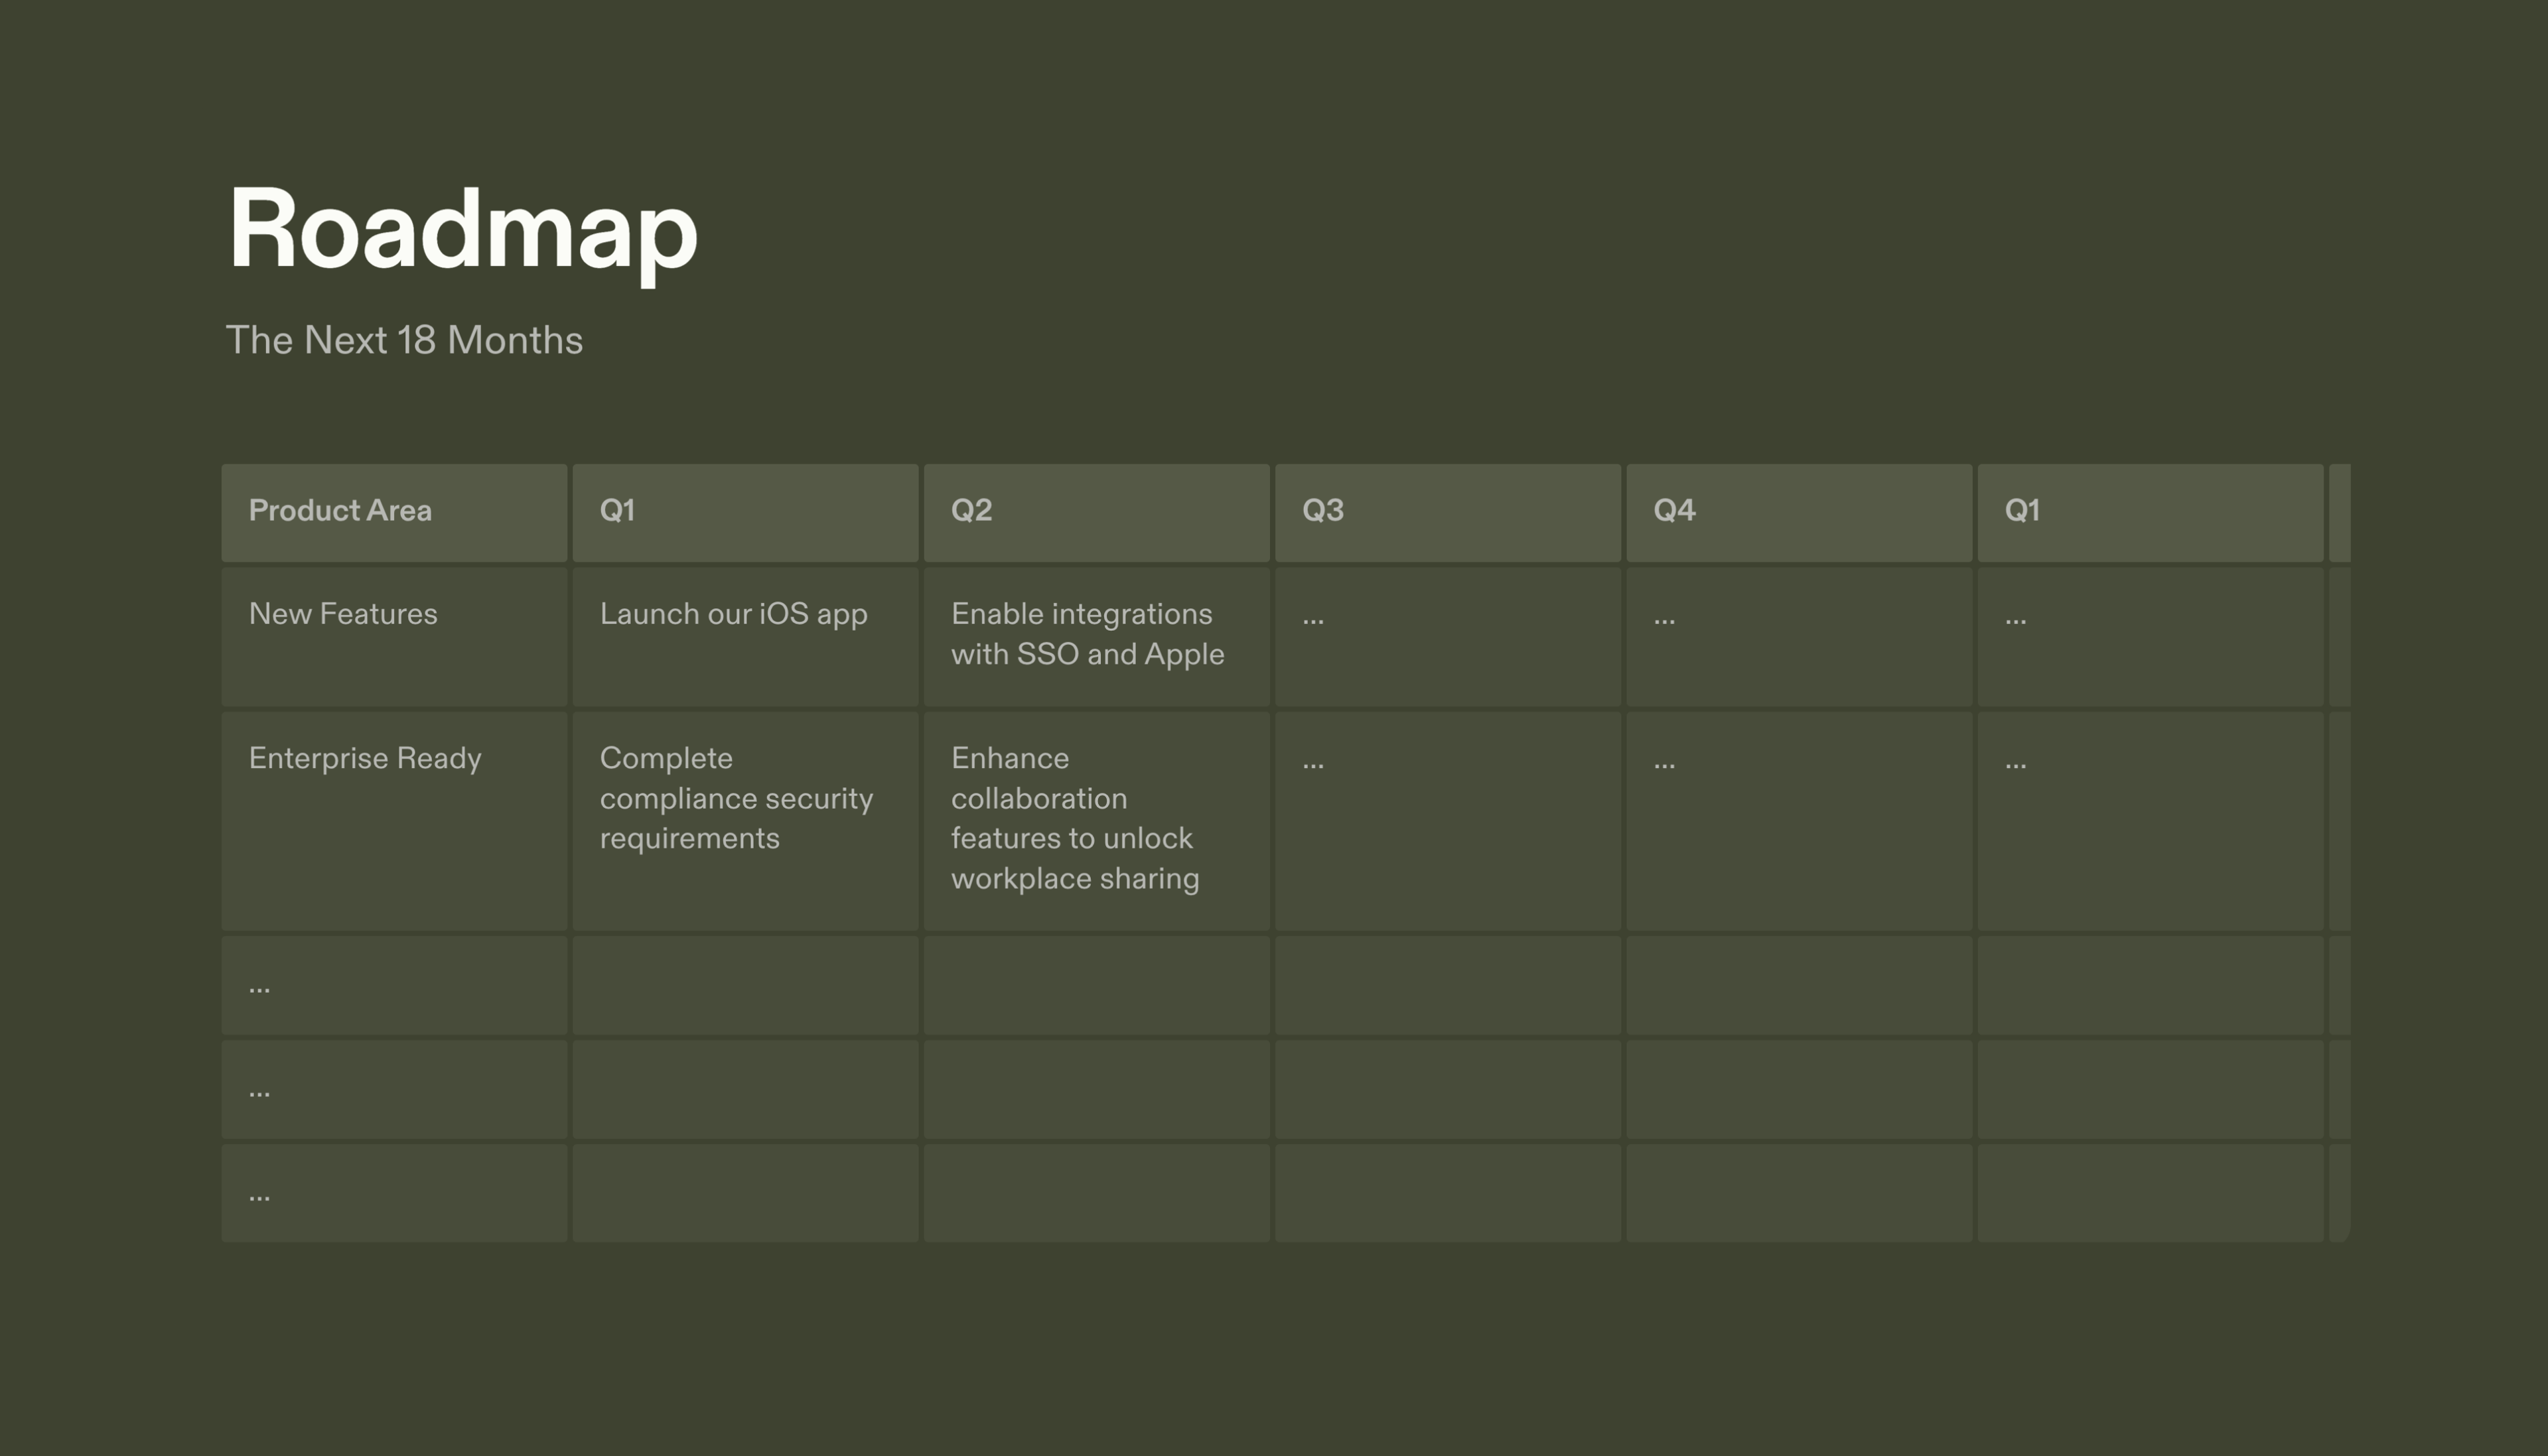 Fundraising Pitch Series A Template – Roadmap Section